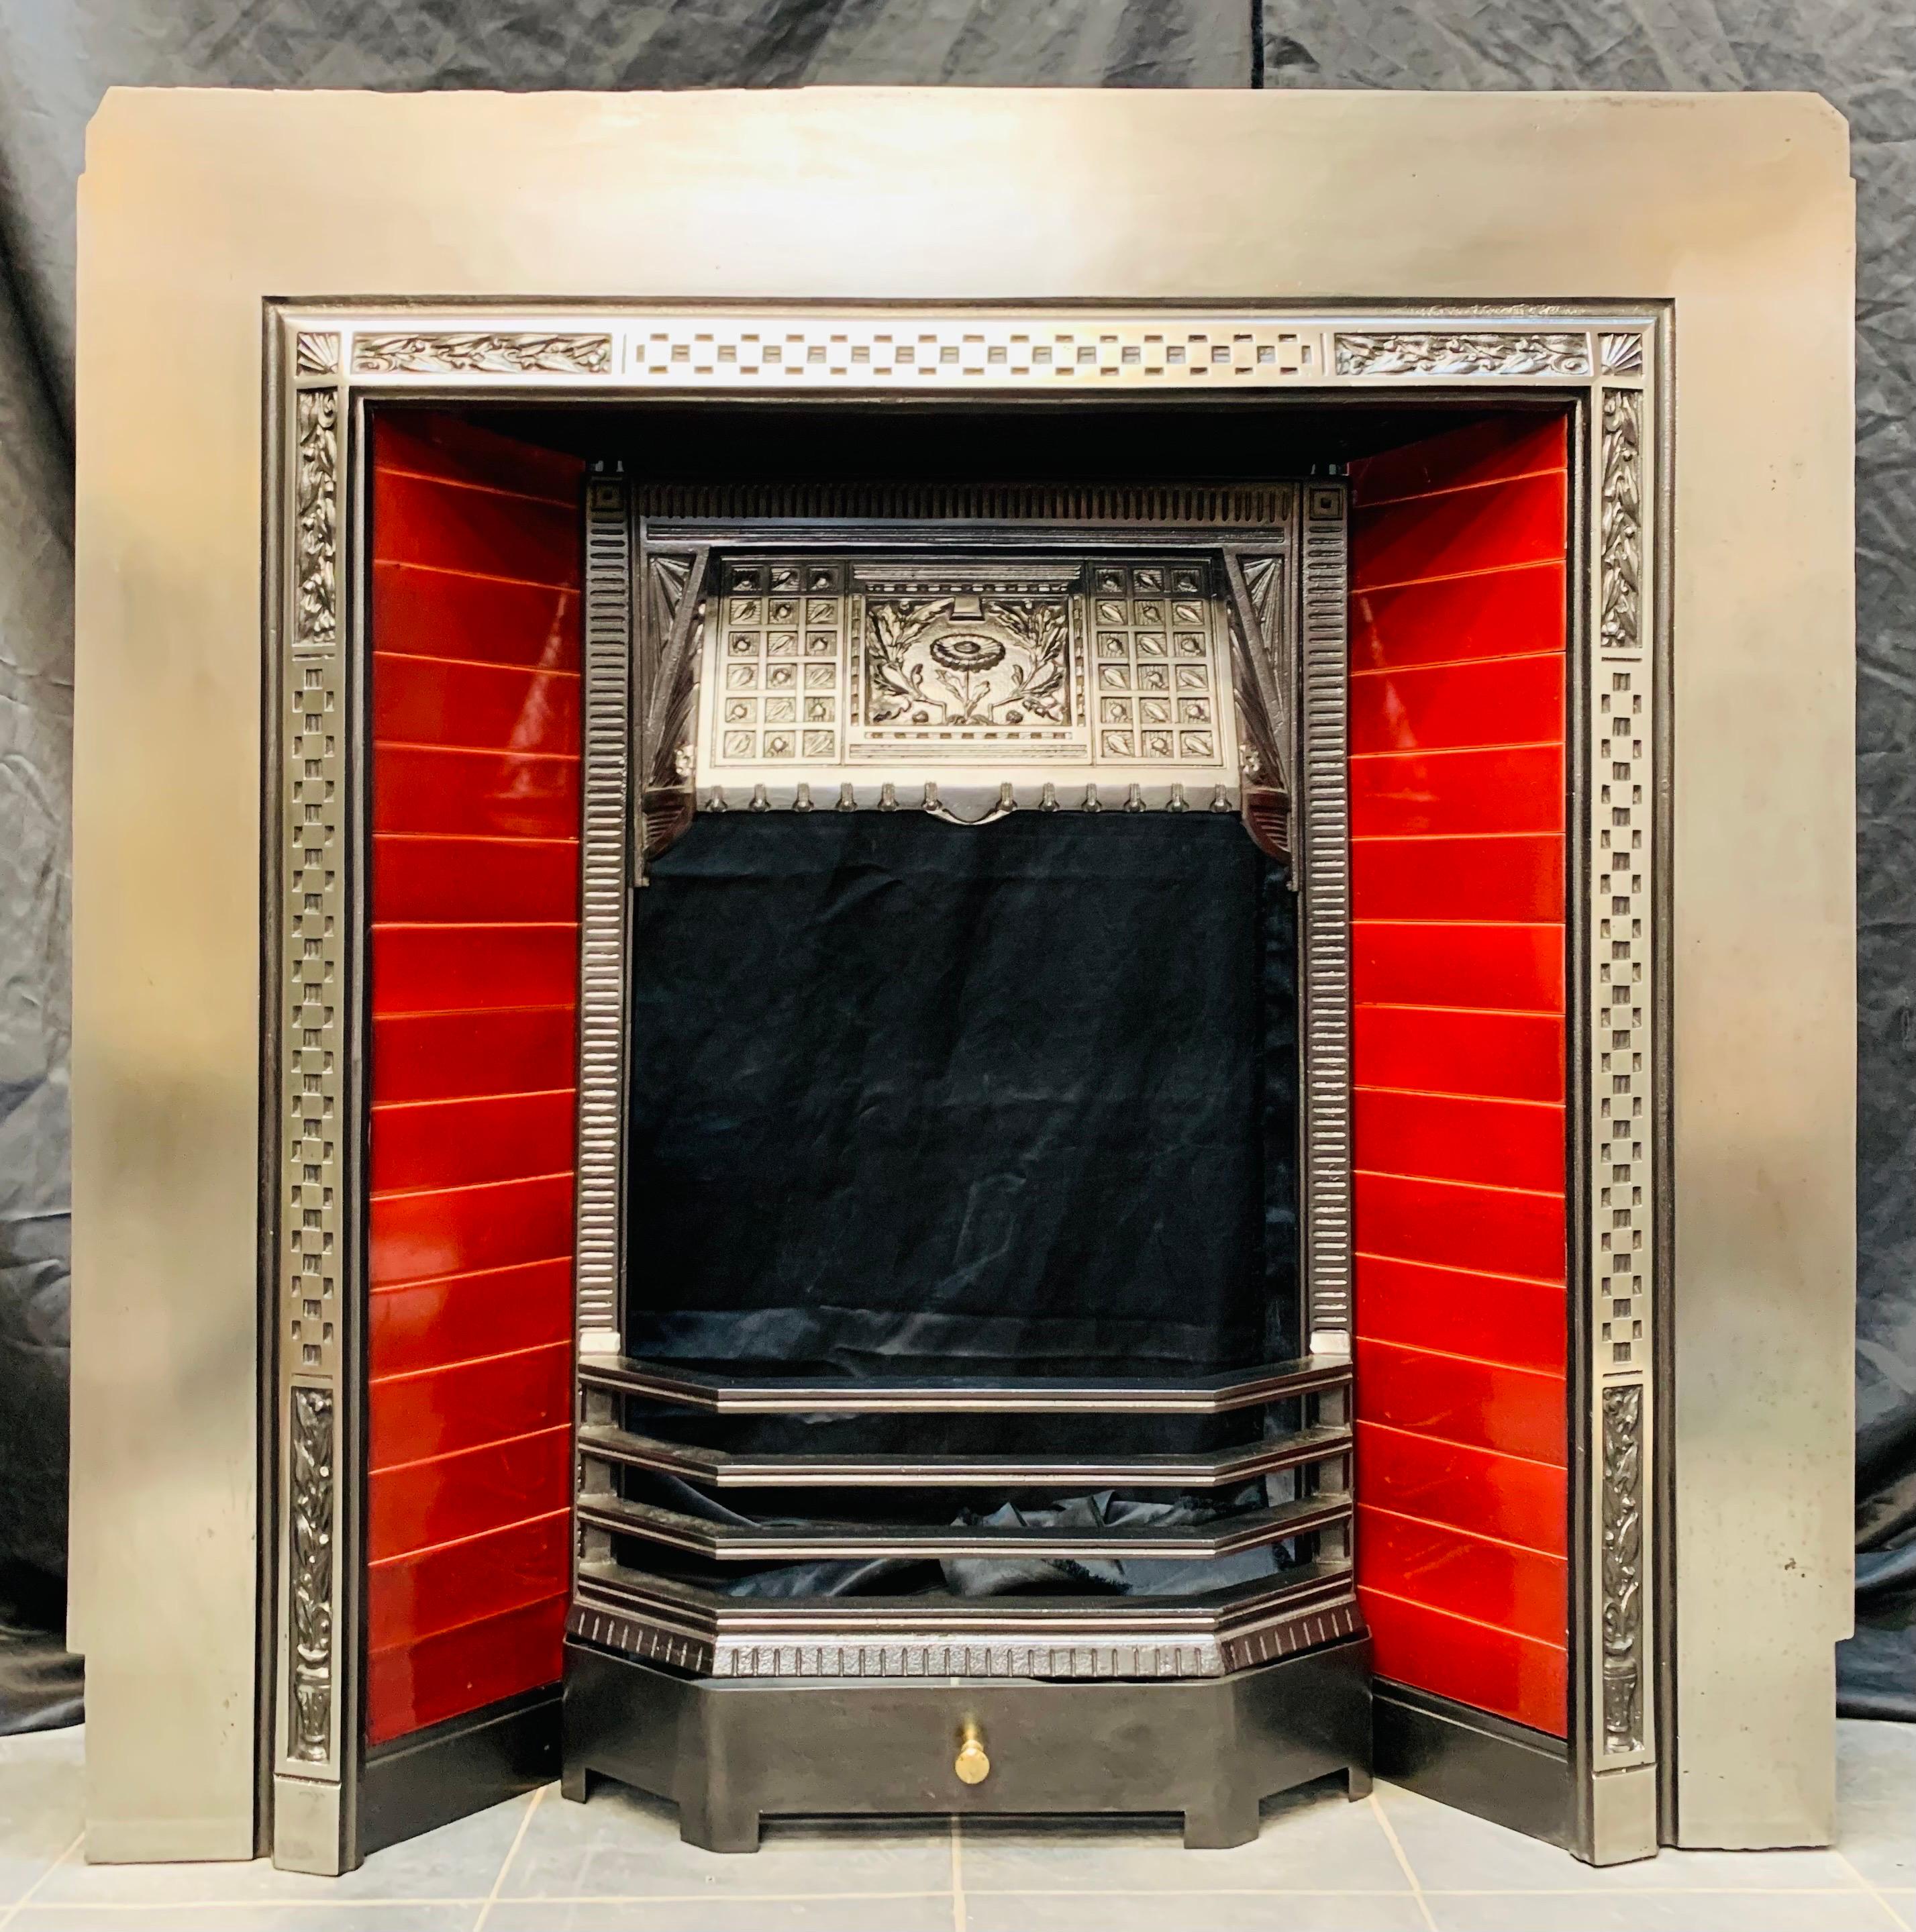 A bold and flamboyant 19th century Victorian cast iron fireplace insert by the renowned foundry Carron of Falkirk. A polished outer plate with a raised cast framed border. The returning rectangular tiles in the shade of Victorian dinning room room